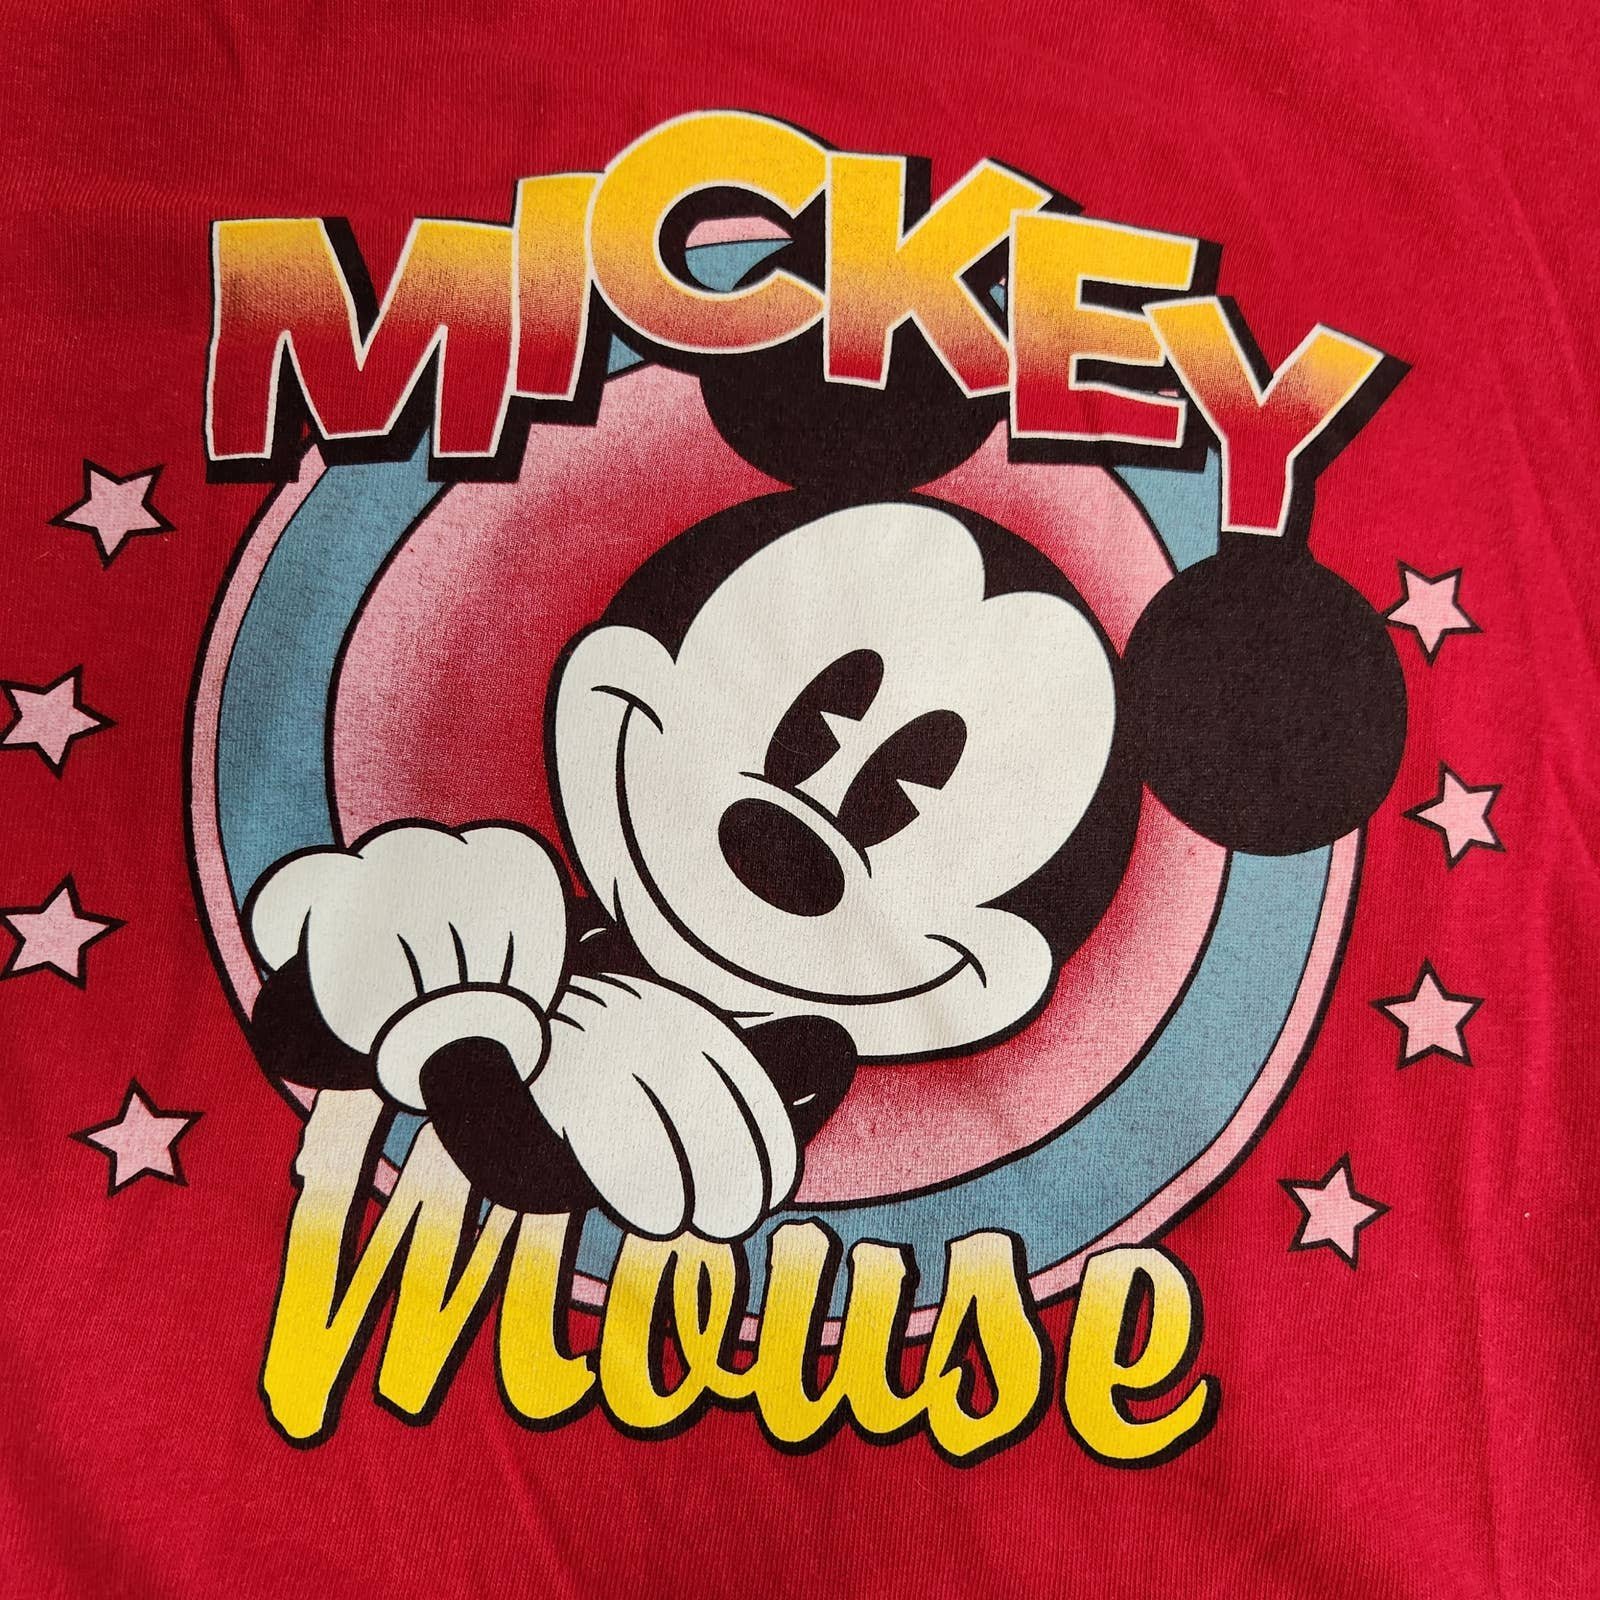 High quality Disney 2X Mickey Mouse Short Sleeve Red T Shirt L26KbWI8n Outlet Store